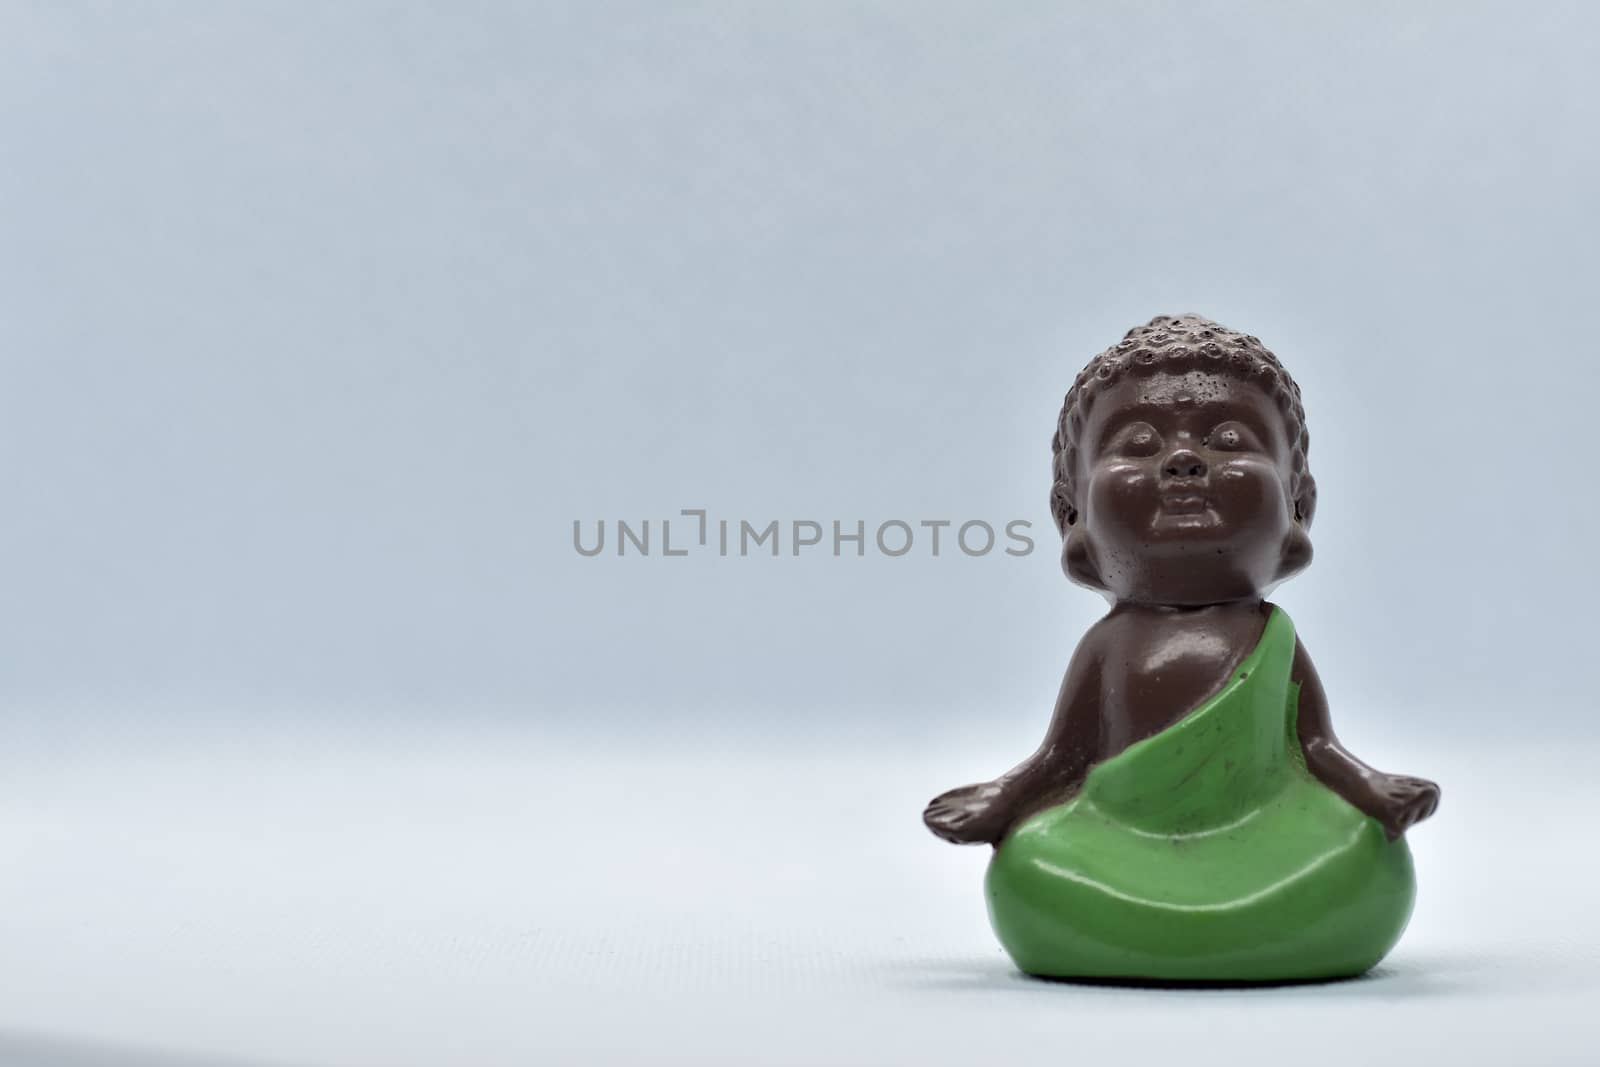 Chinese traditional little monk figure two by rkbalaji